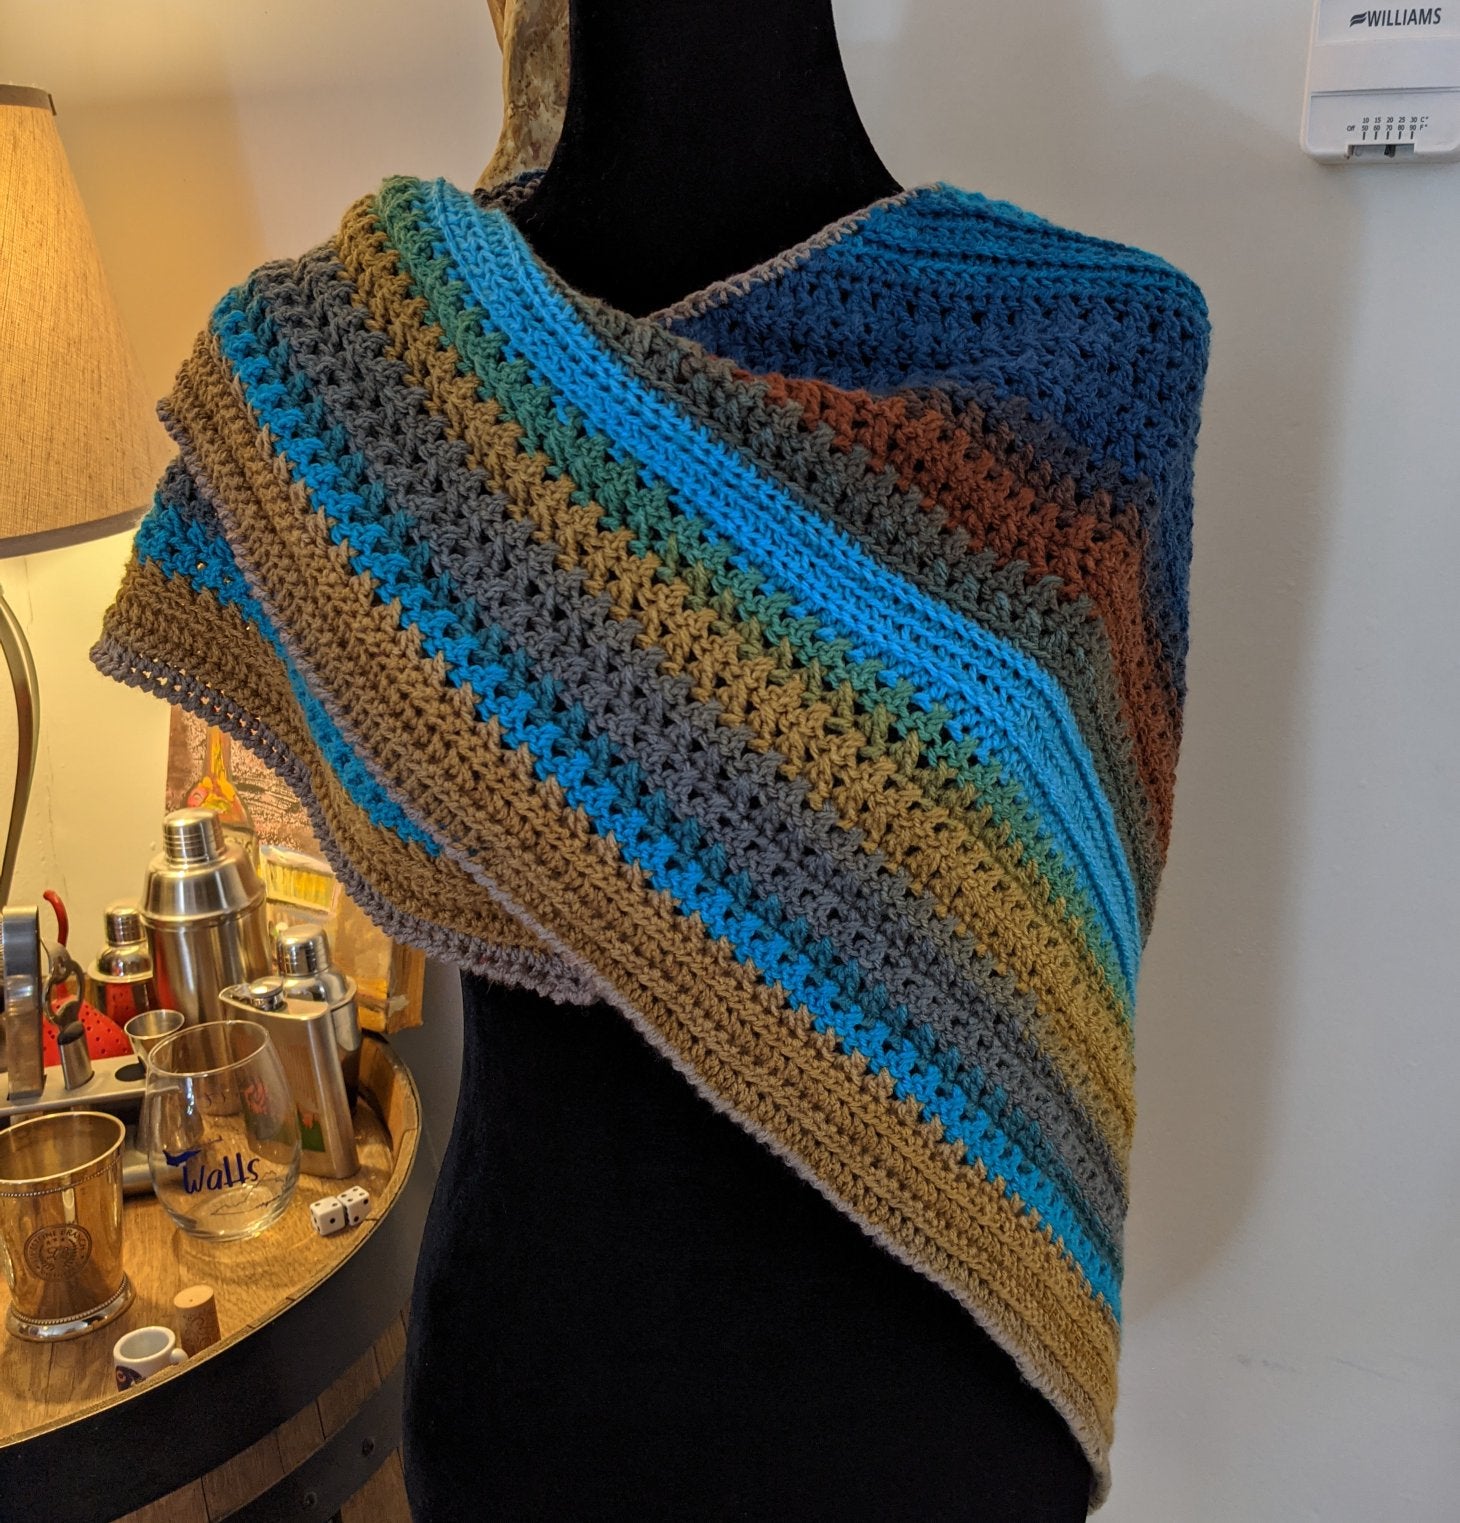 X Marks the Spot Shawl in Sphinx